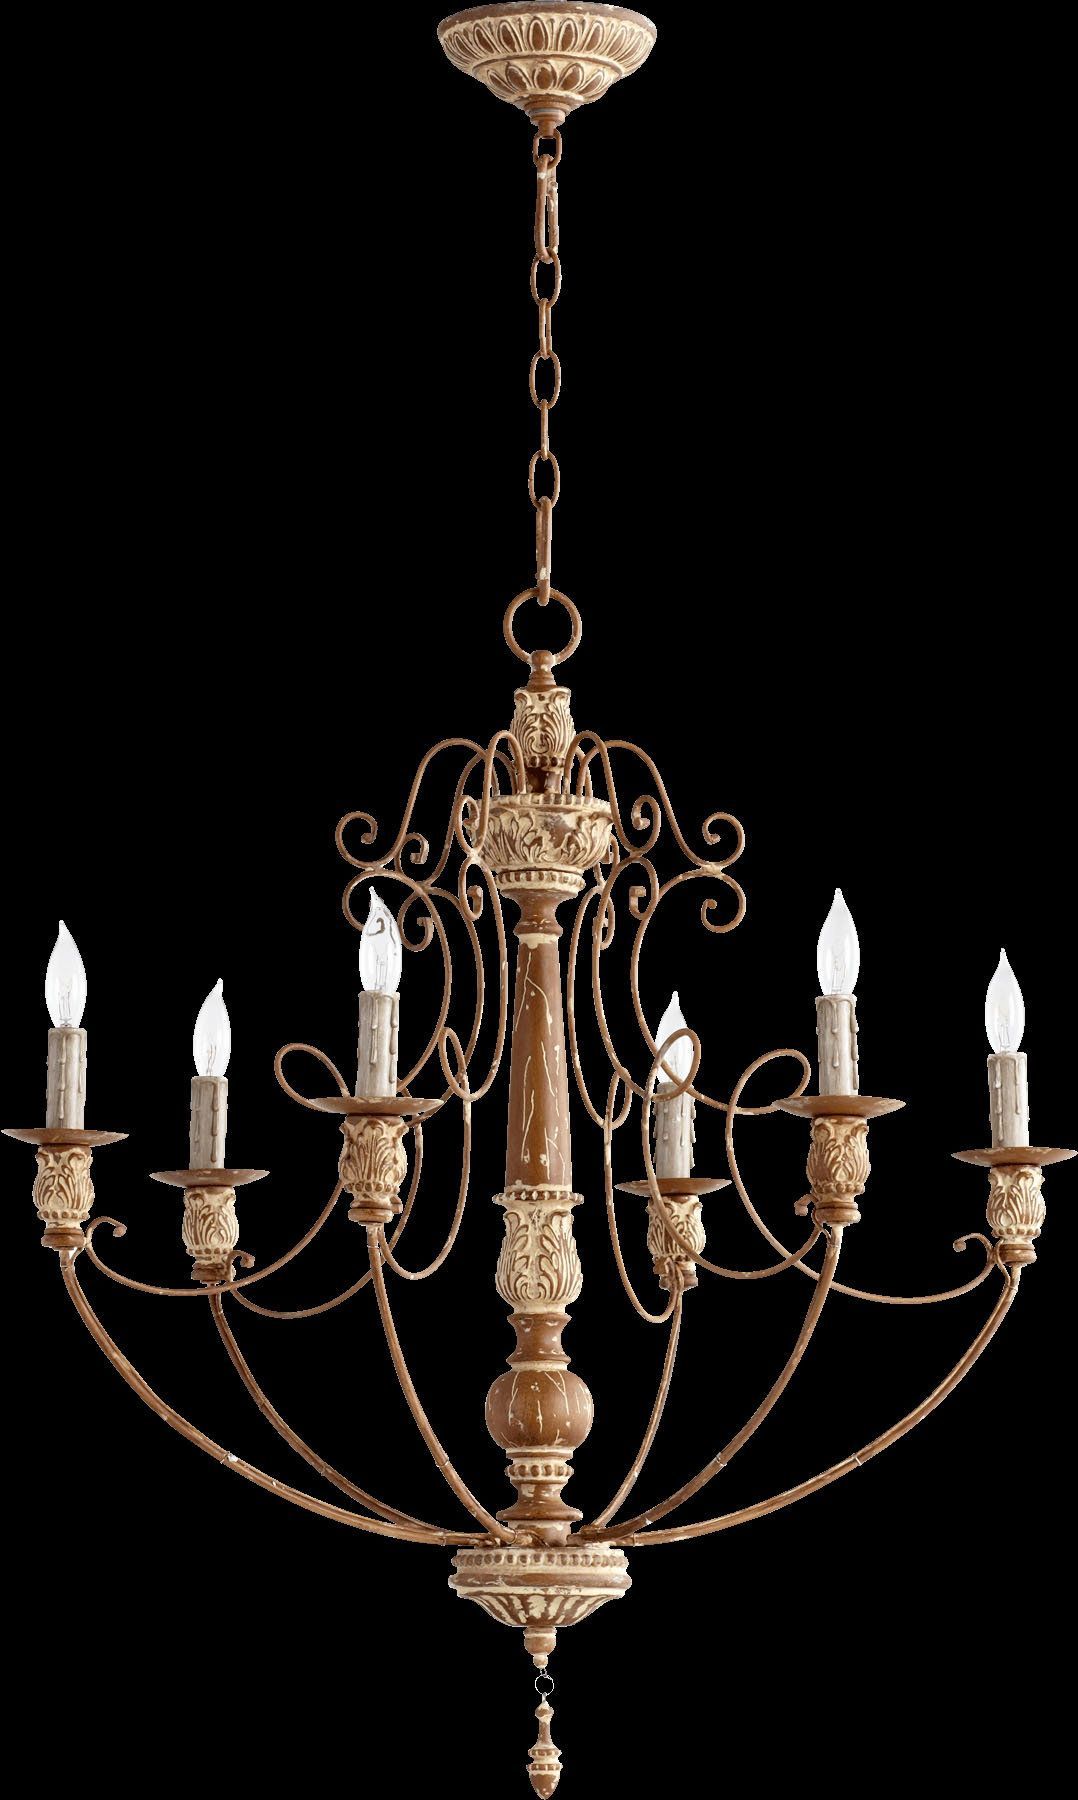 Paladino 6 Light Chandelier In 2019 | Products | Chandelier Within Paladino 6 Light Chandeliers (View 12 of 30)